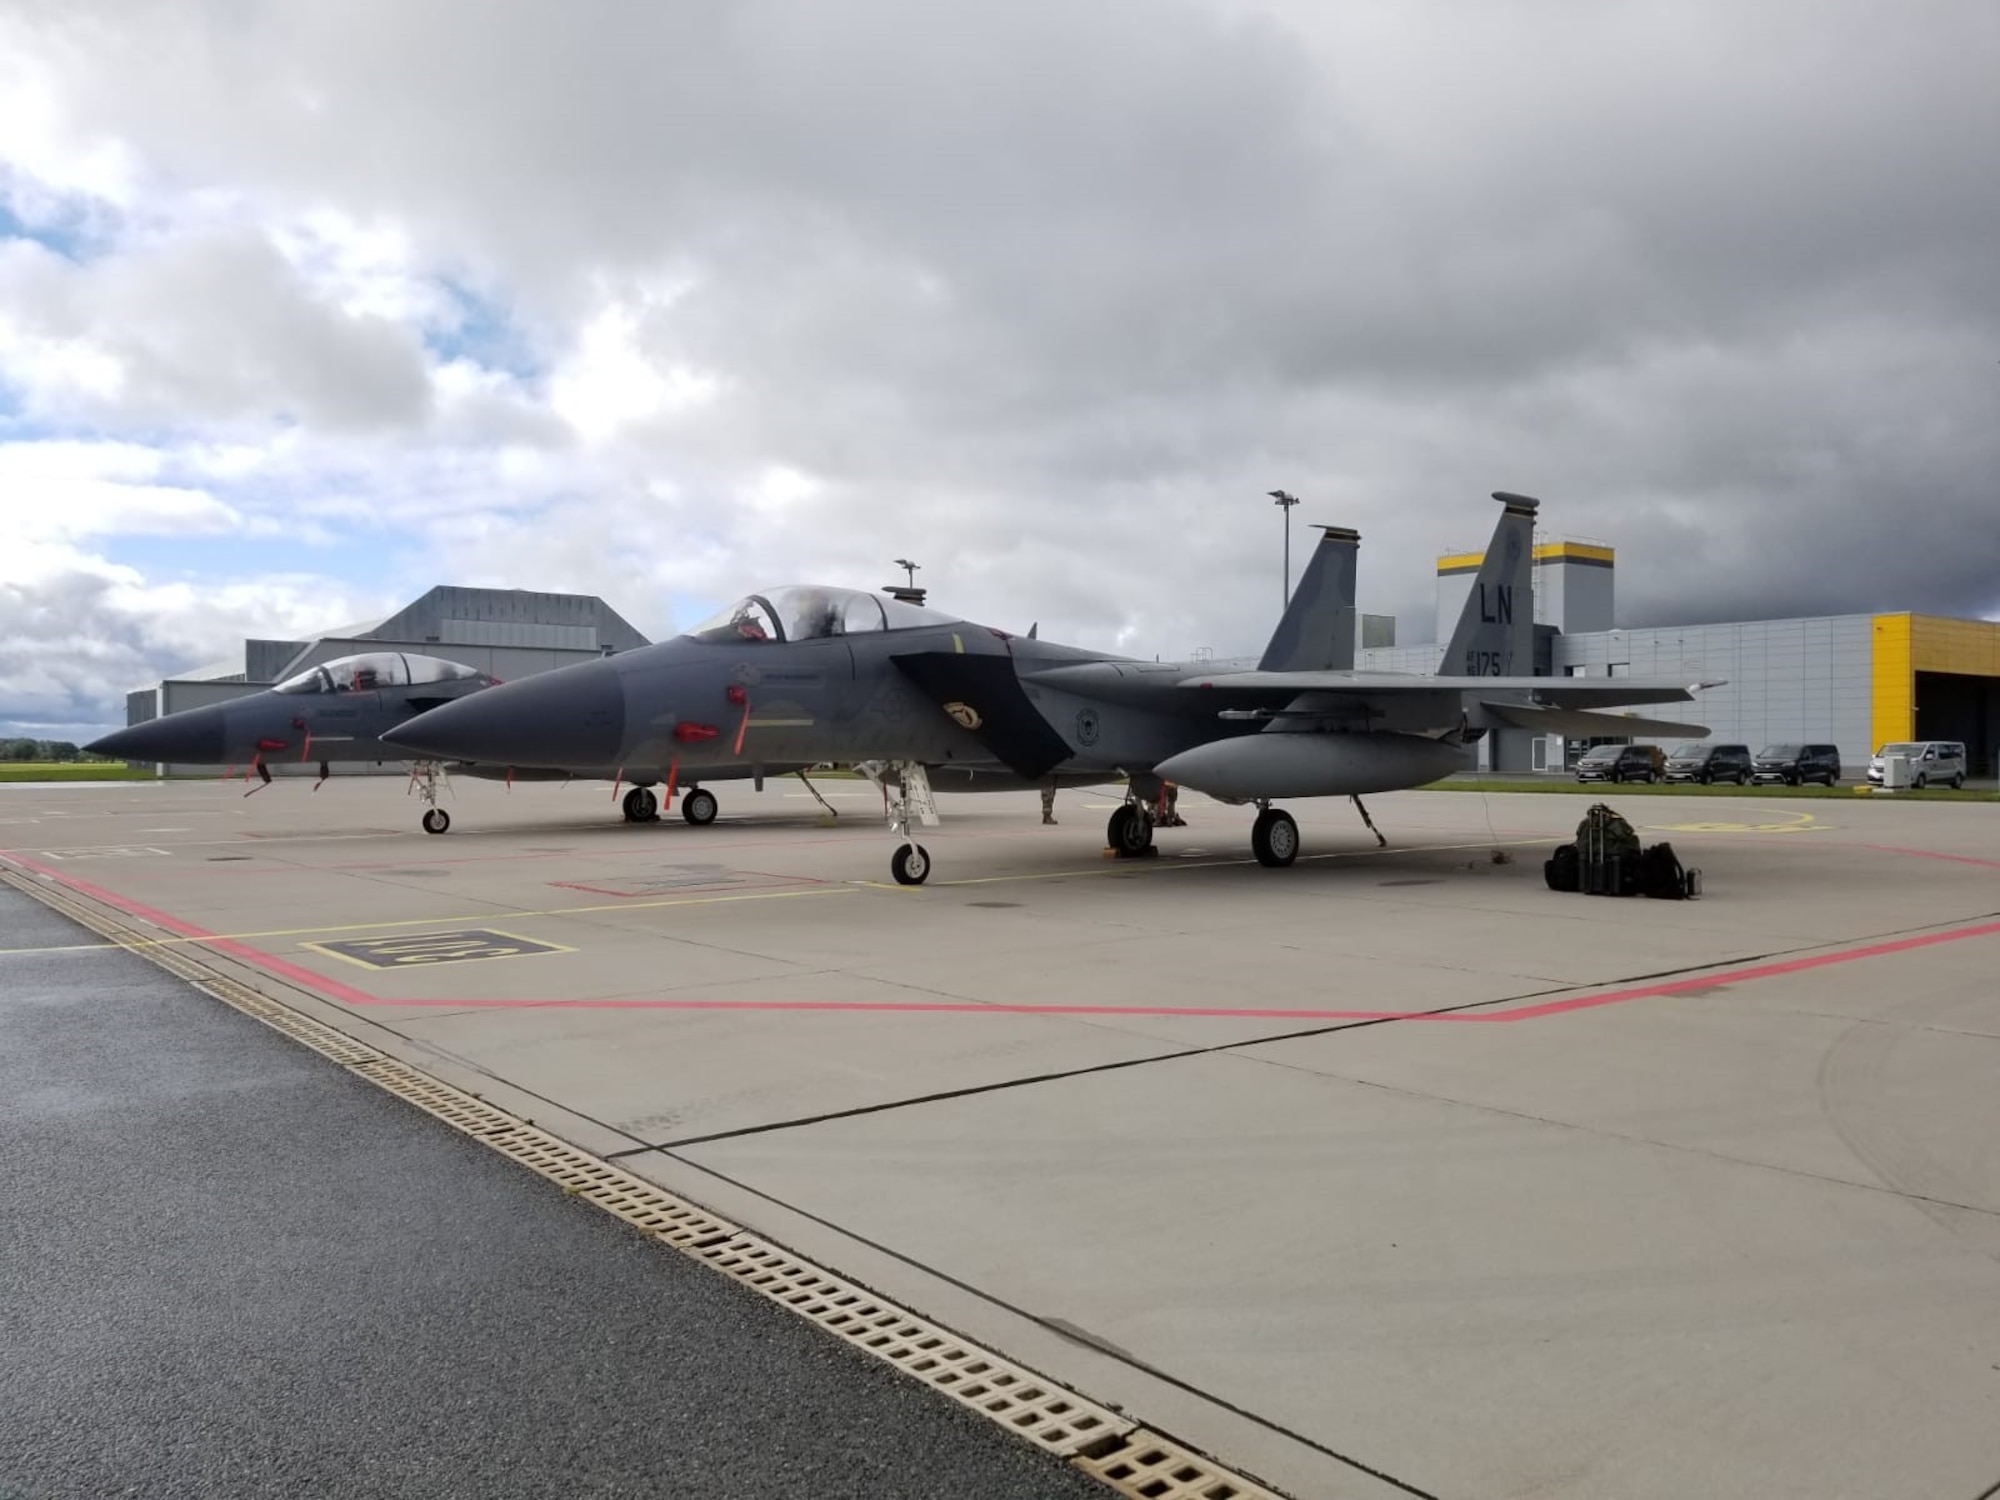 Two U.S. Air Force F-15 Eagle aircraft from Royal Air Force Lakenheath are parked at Lielvarde Air Base, Latvia during an instrument flight rules certification ceremony, September 2021.